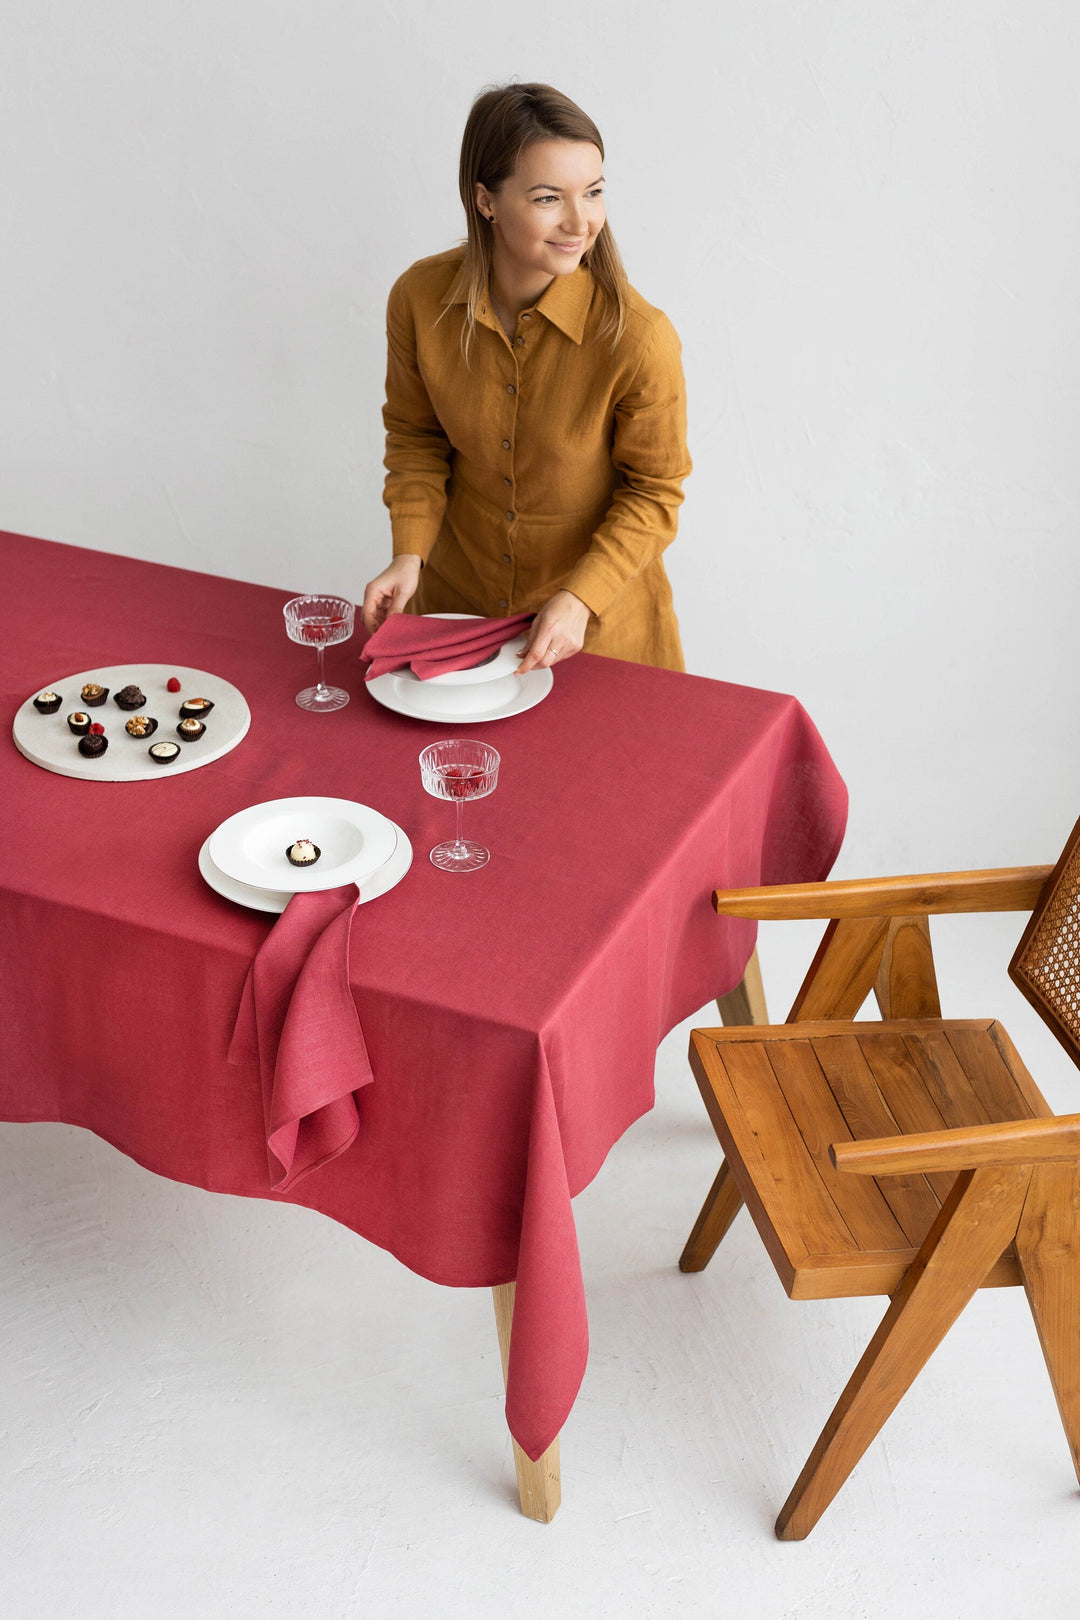 Linen Tablecloth In Raspberry Color Decorated On Table 3 - Daily Linen